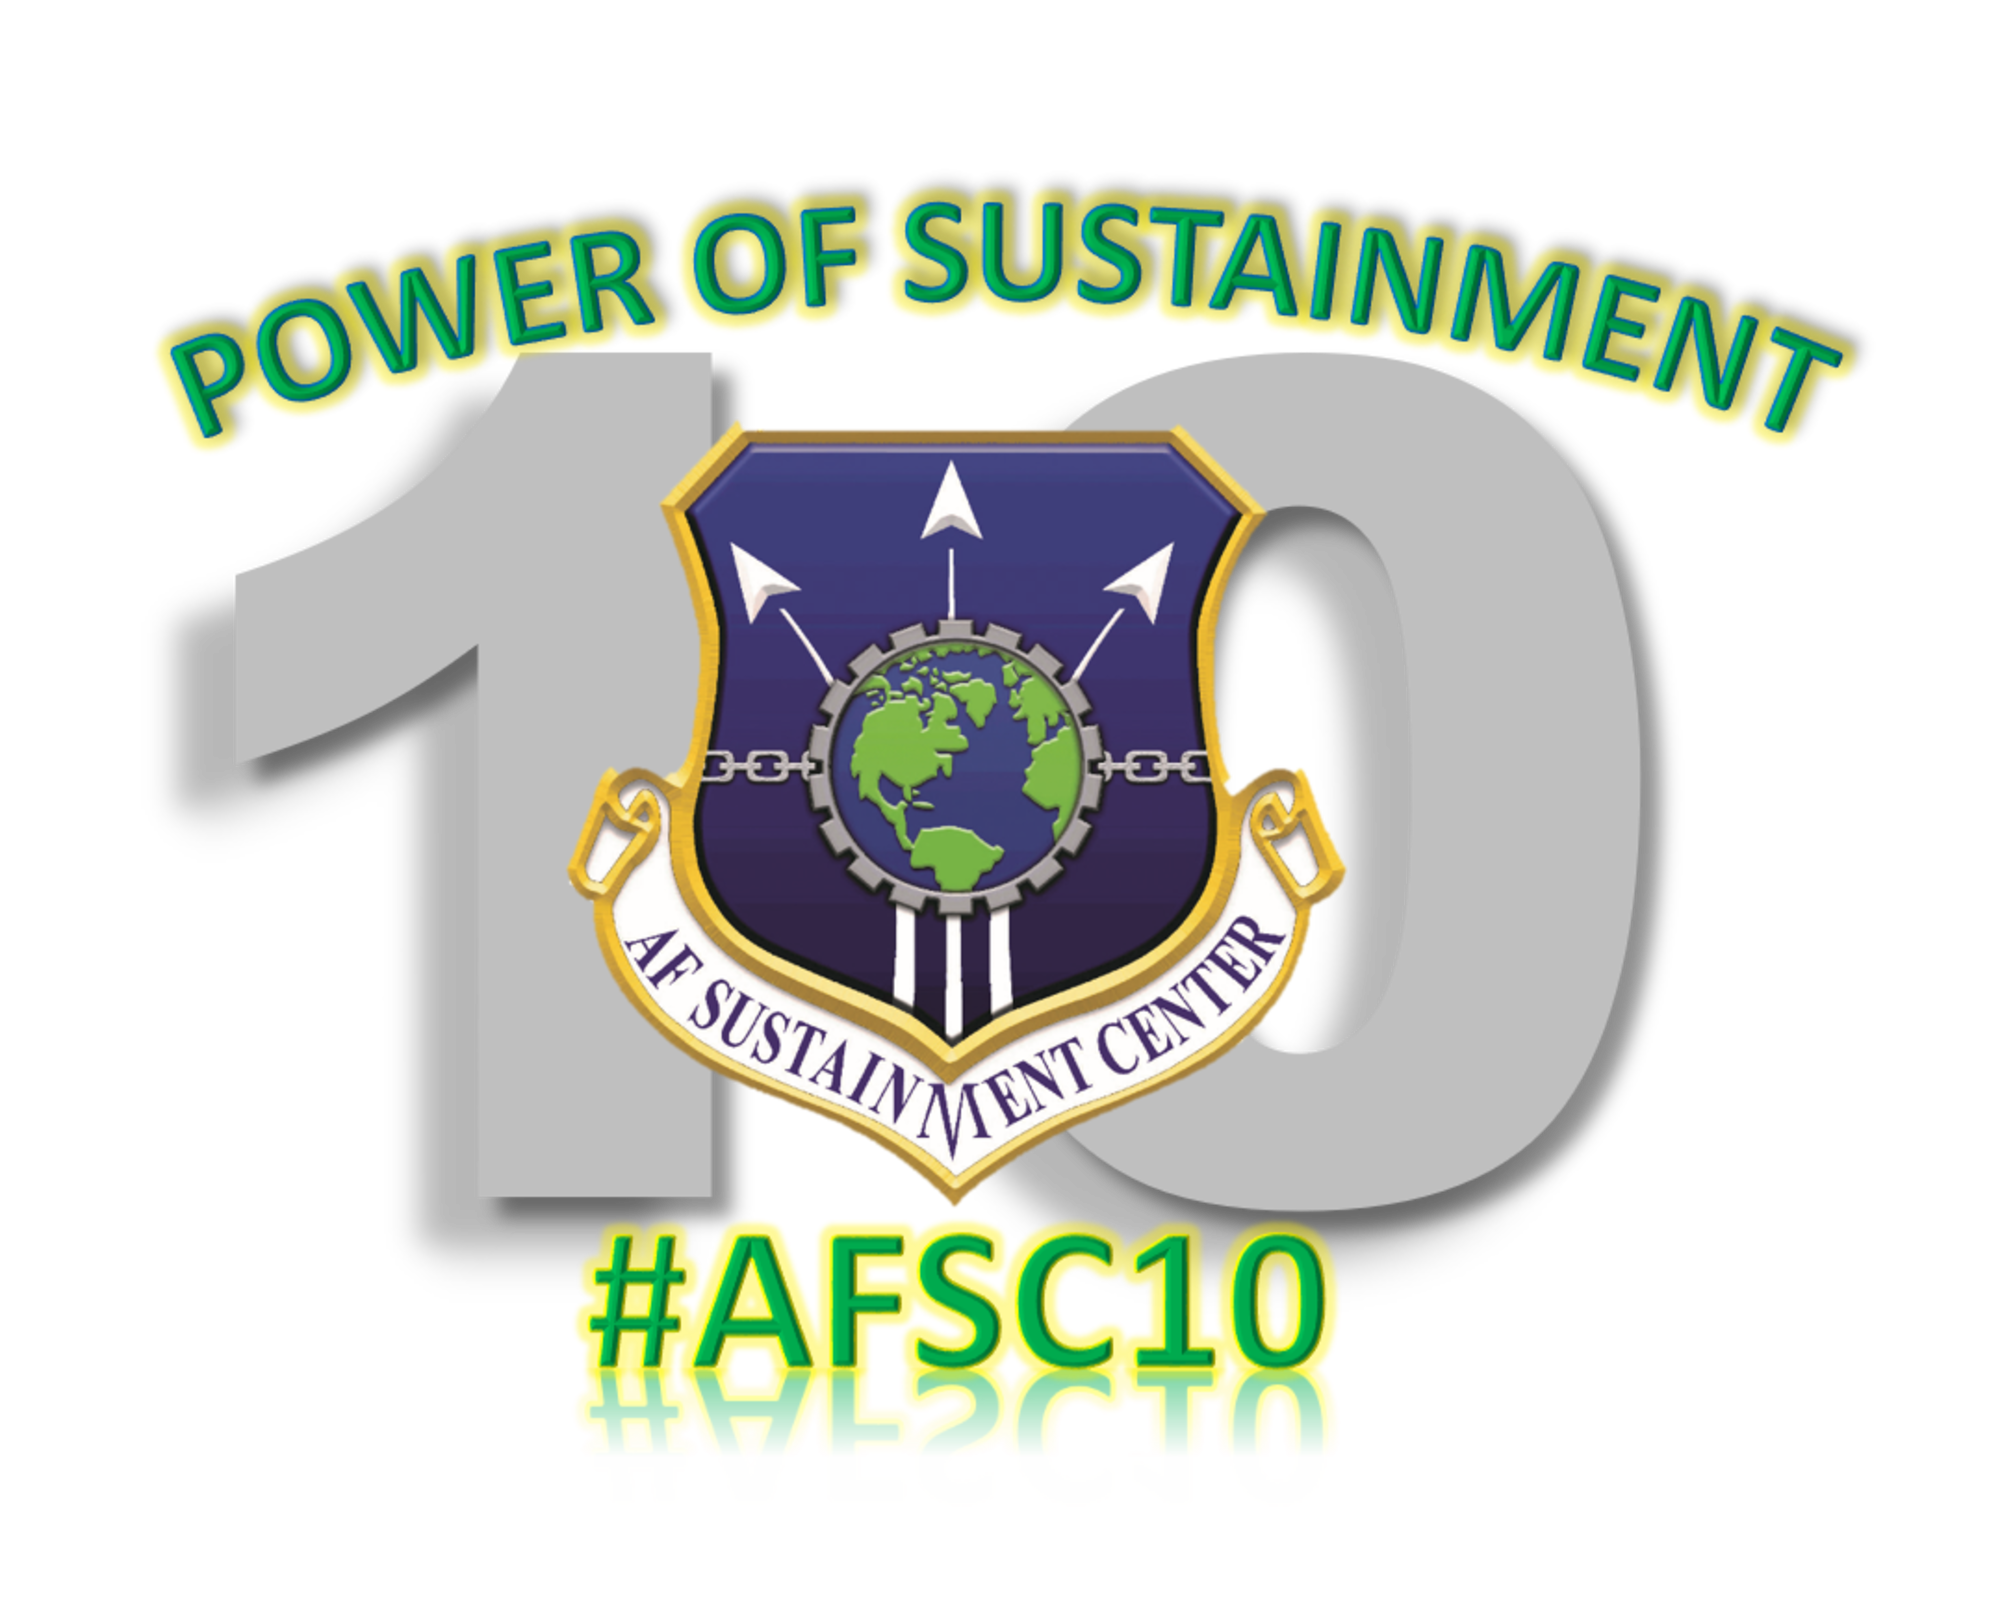 Logo of AFSC 10th year anniversary